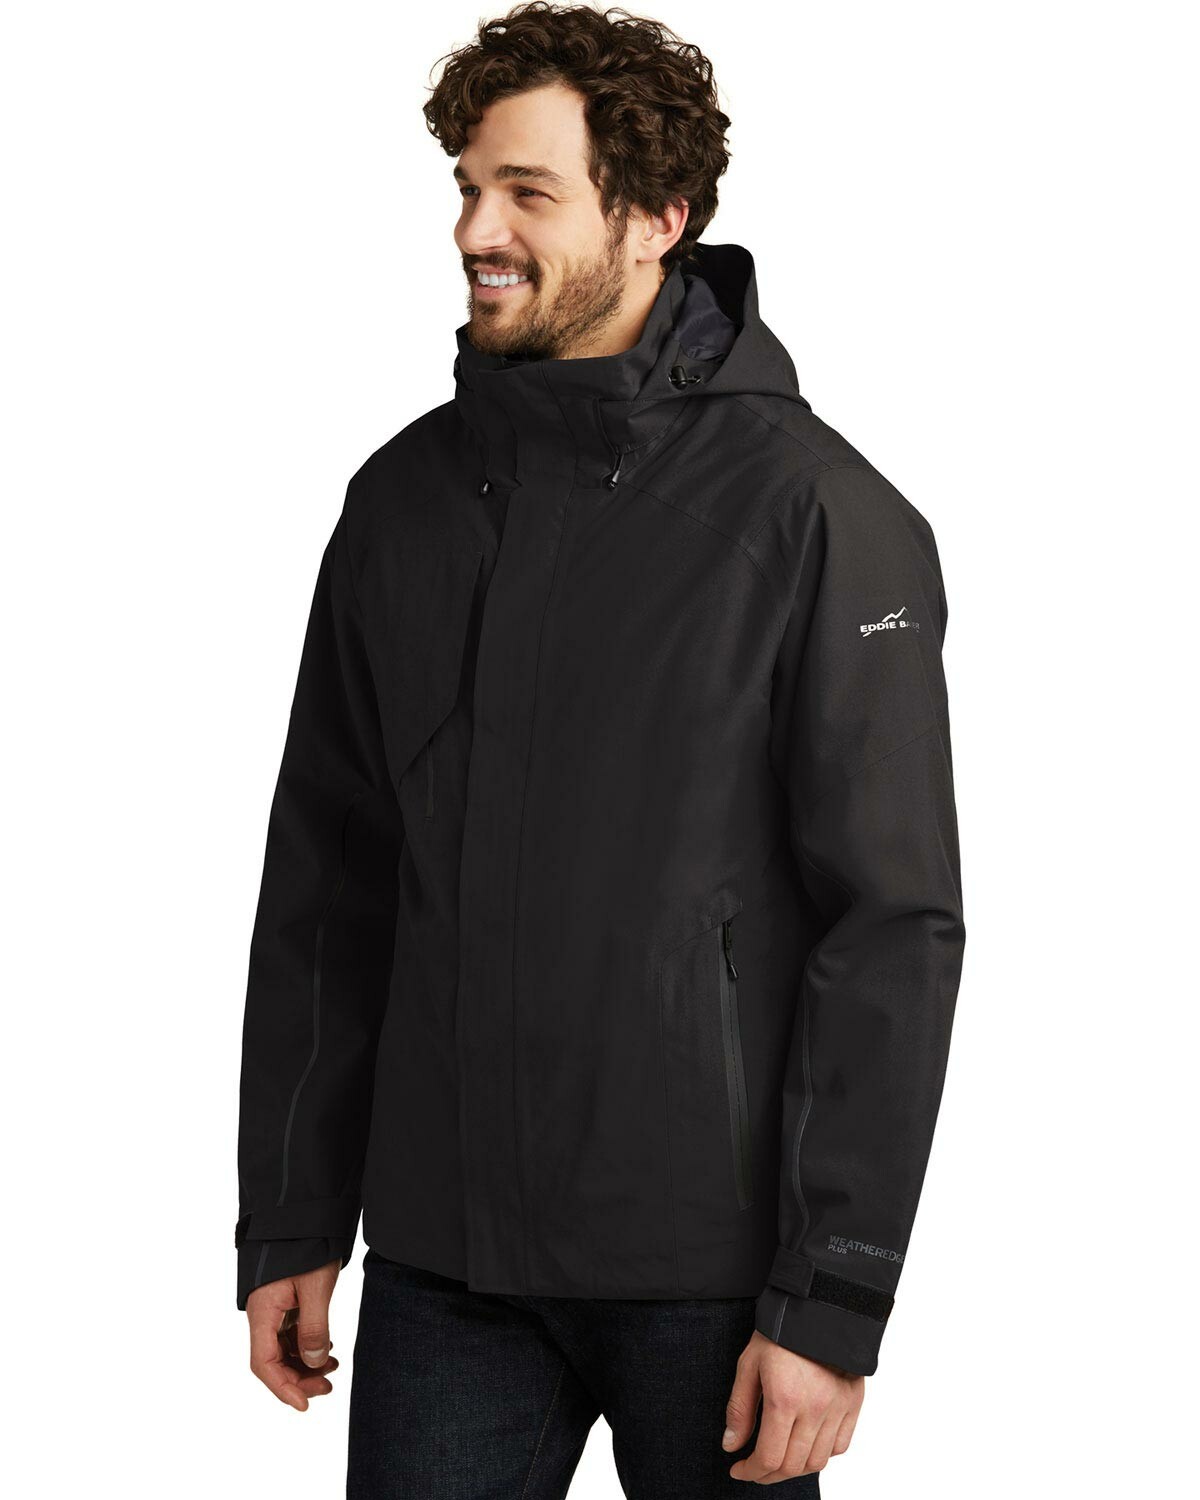 Core365 88189 Brisk Insulated Jacket 